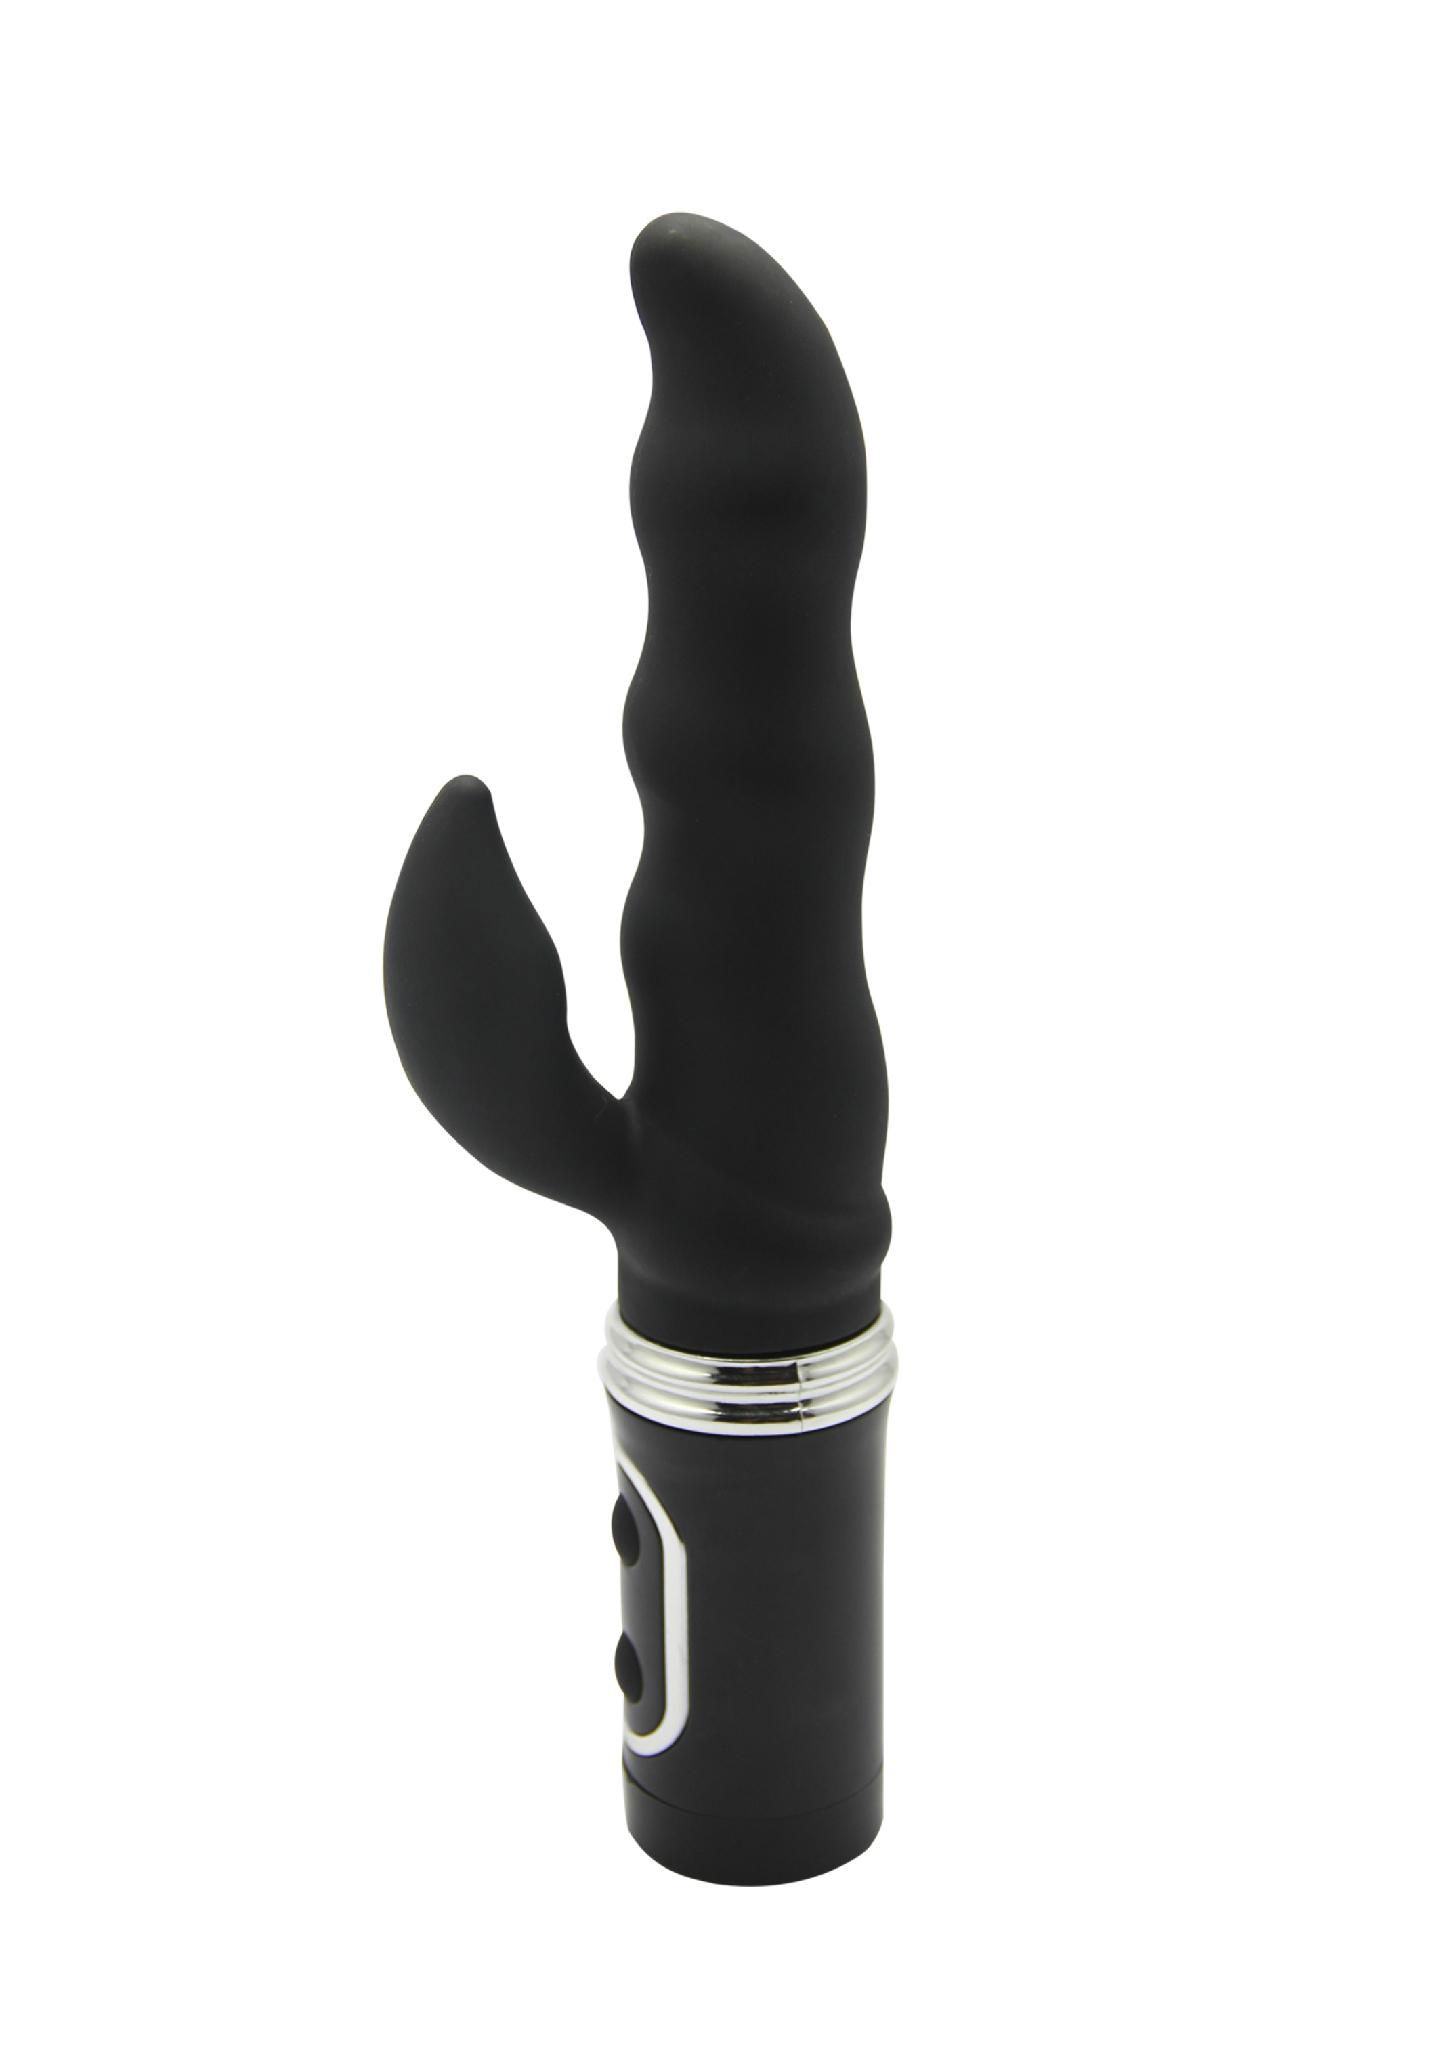 Adult Sex Toy Coral Vibrator 3